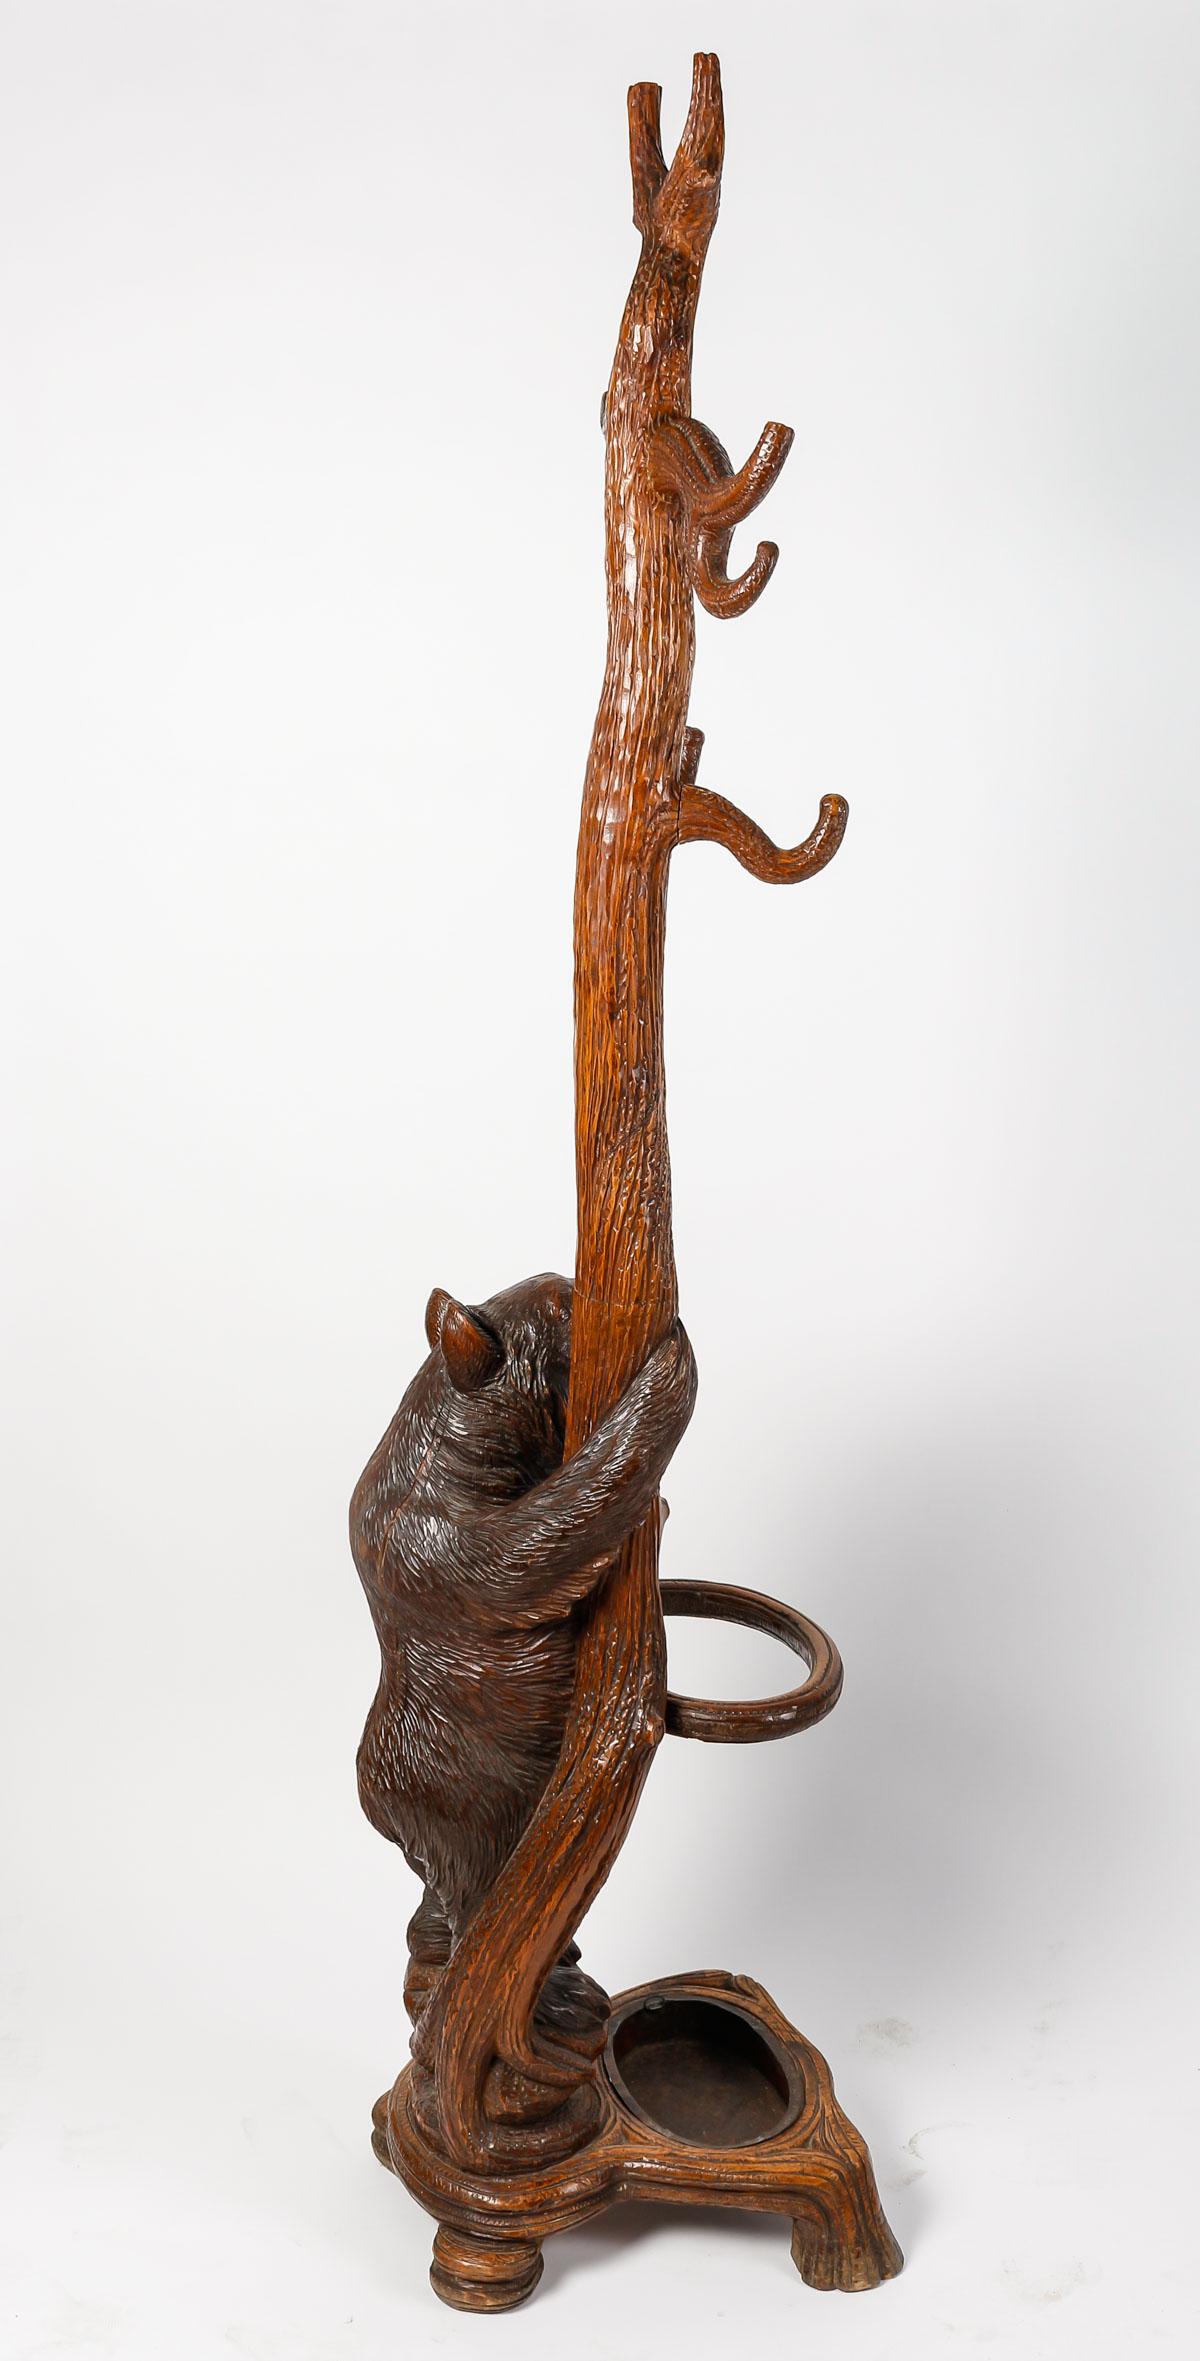 Carved wood coat stand, Napoleon III period, 19th century.

Black forest coat rack, Swiss work, carved wood, Napoleon III period, 19th century.
h: 186cm, w: 57cm, d: 41cm